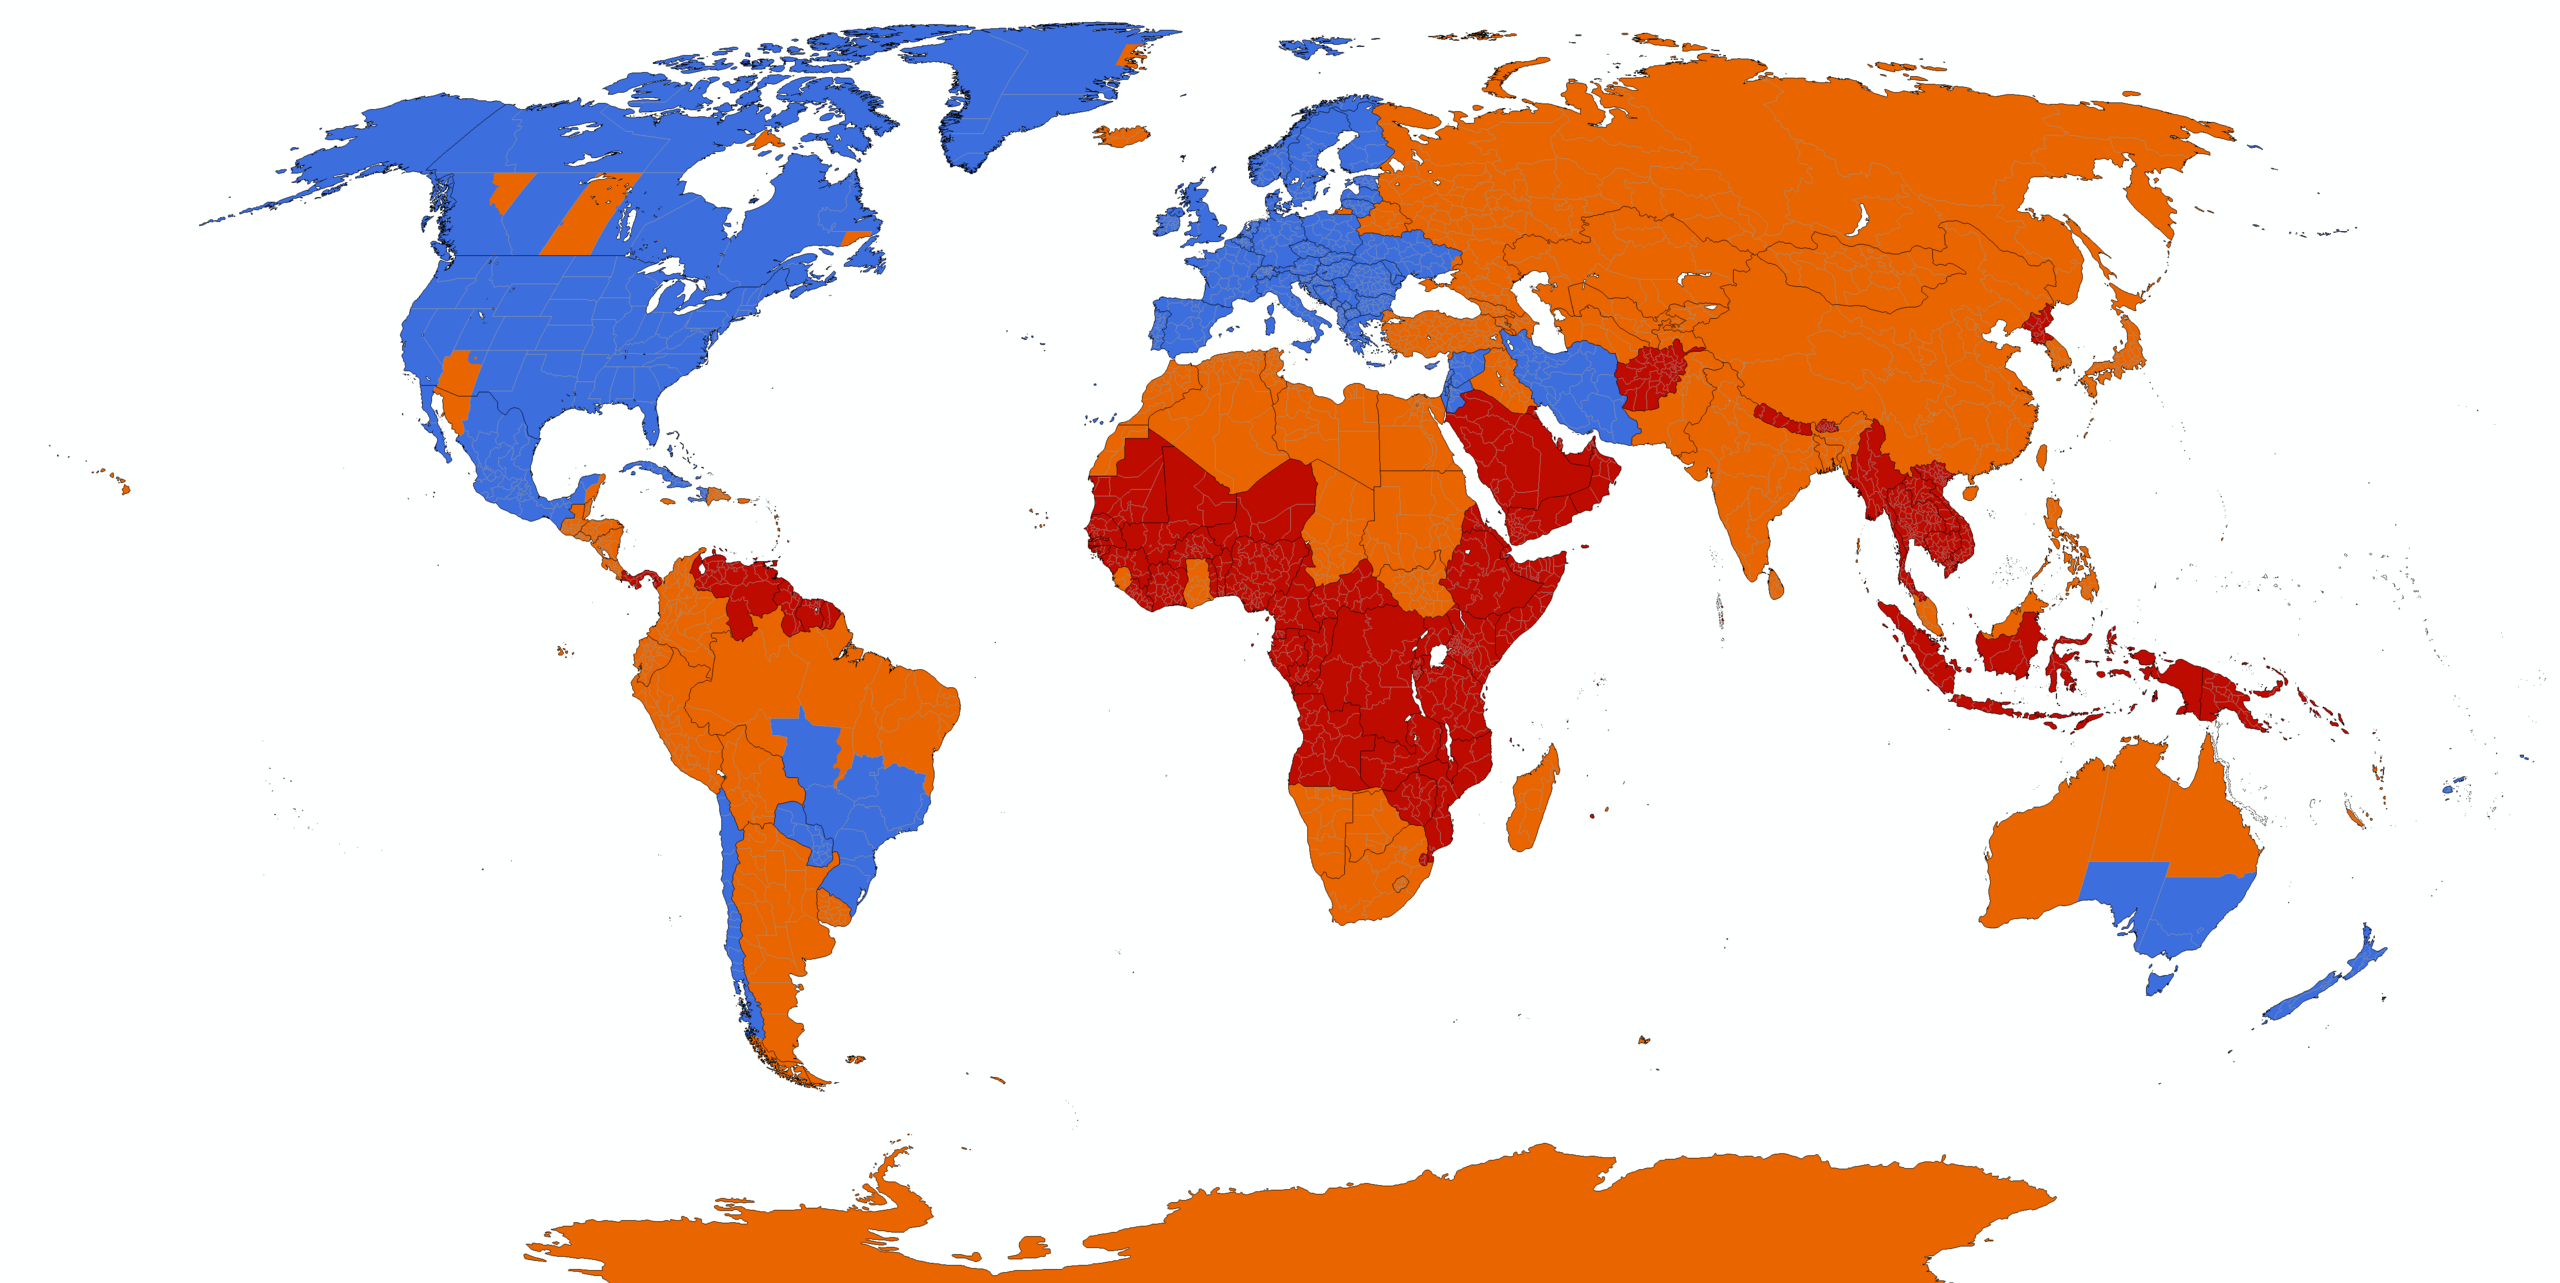 2560px-DaylightSaving-World-Subdivisions.png